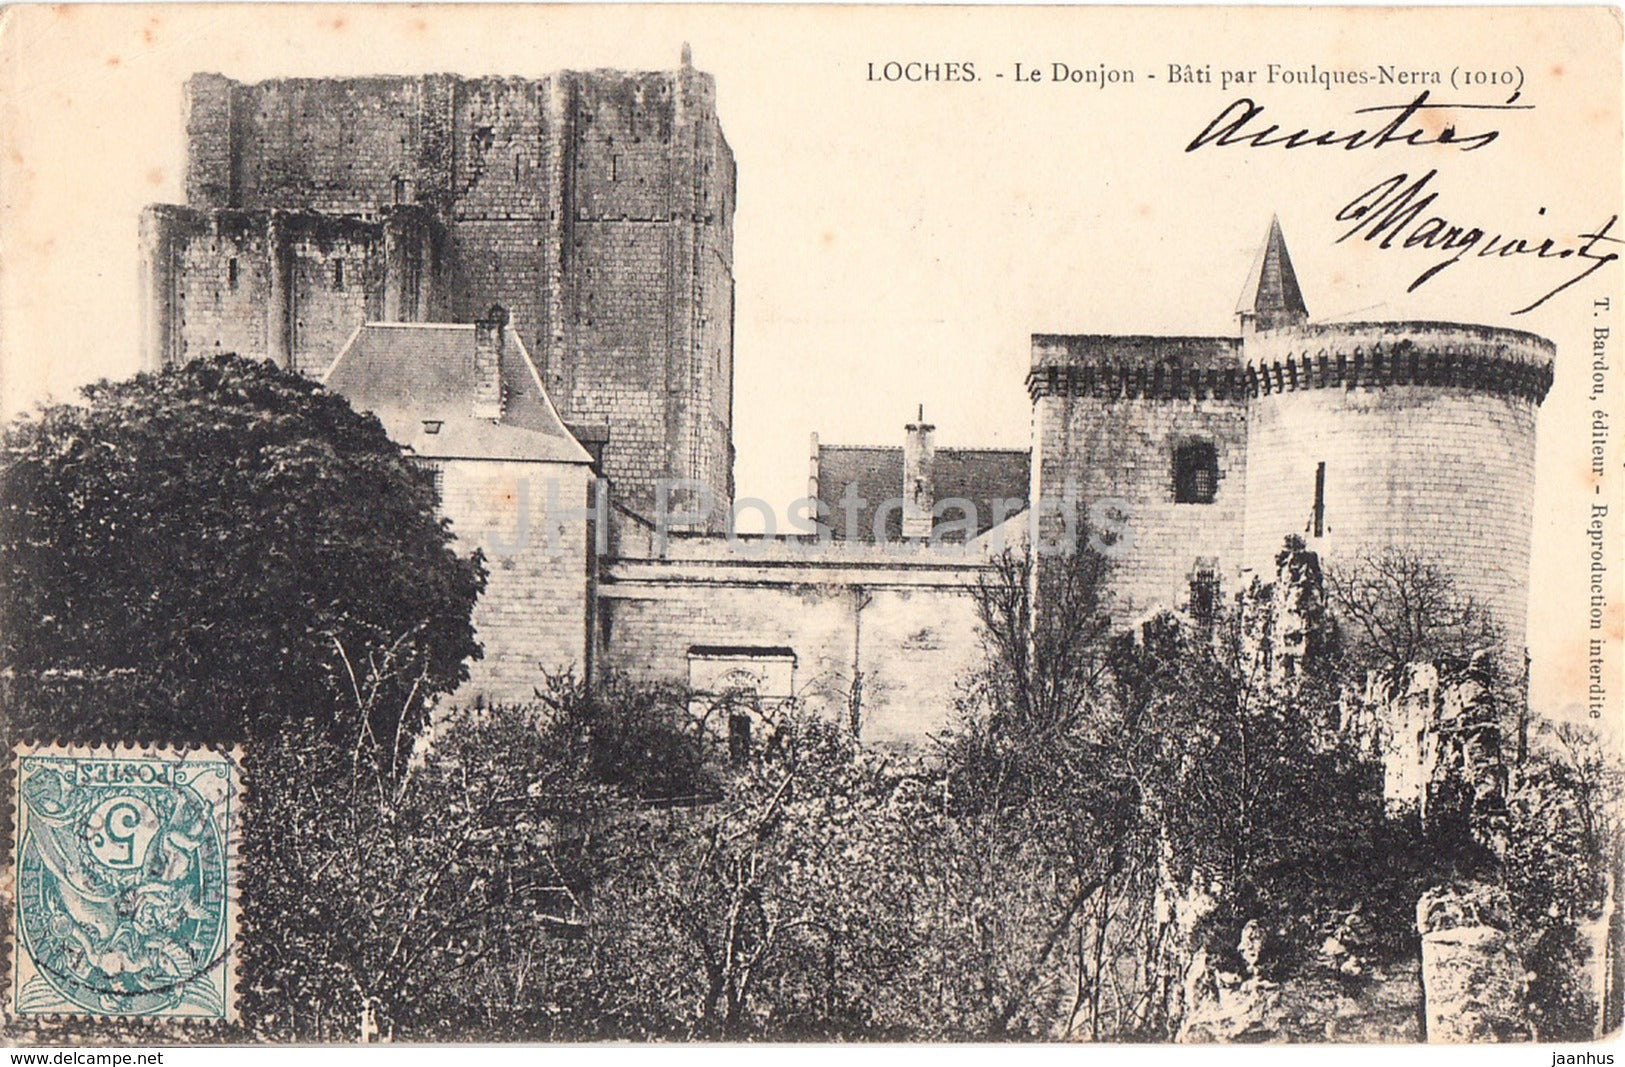 Loches - Le Donjon - Bati par Foulques Nerra -  30 - old postcard - France - used